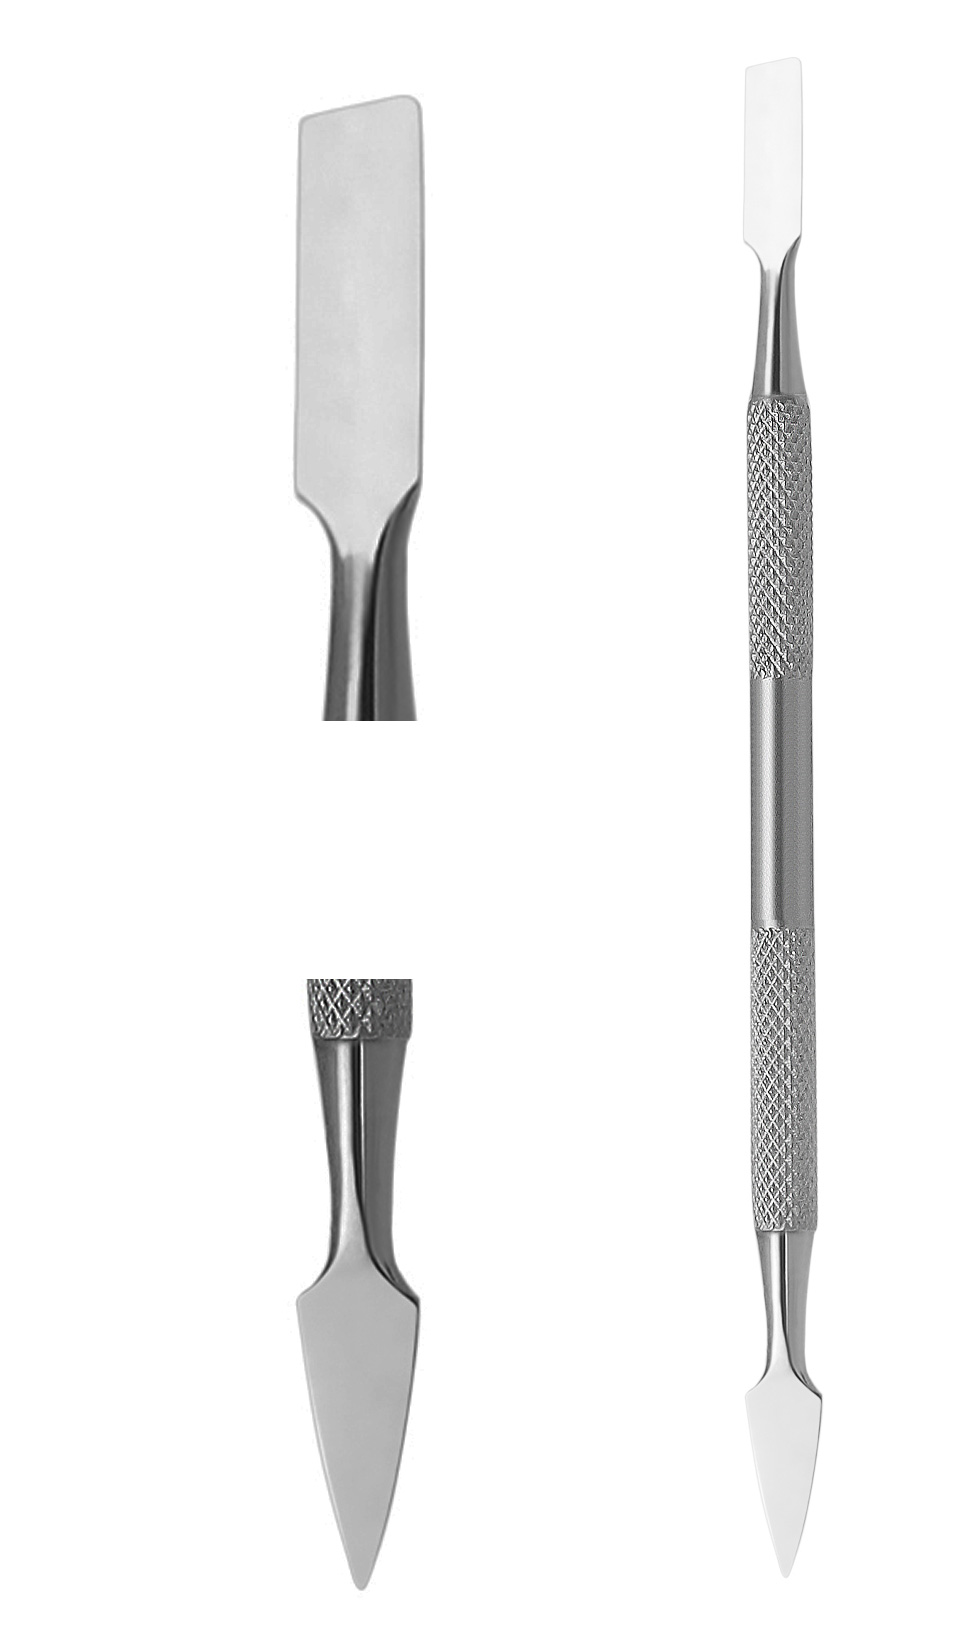 Excellent cuticle pusher & spatula